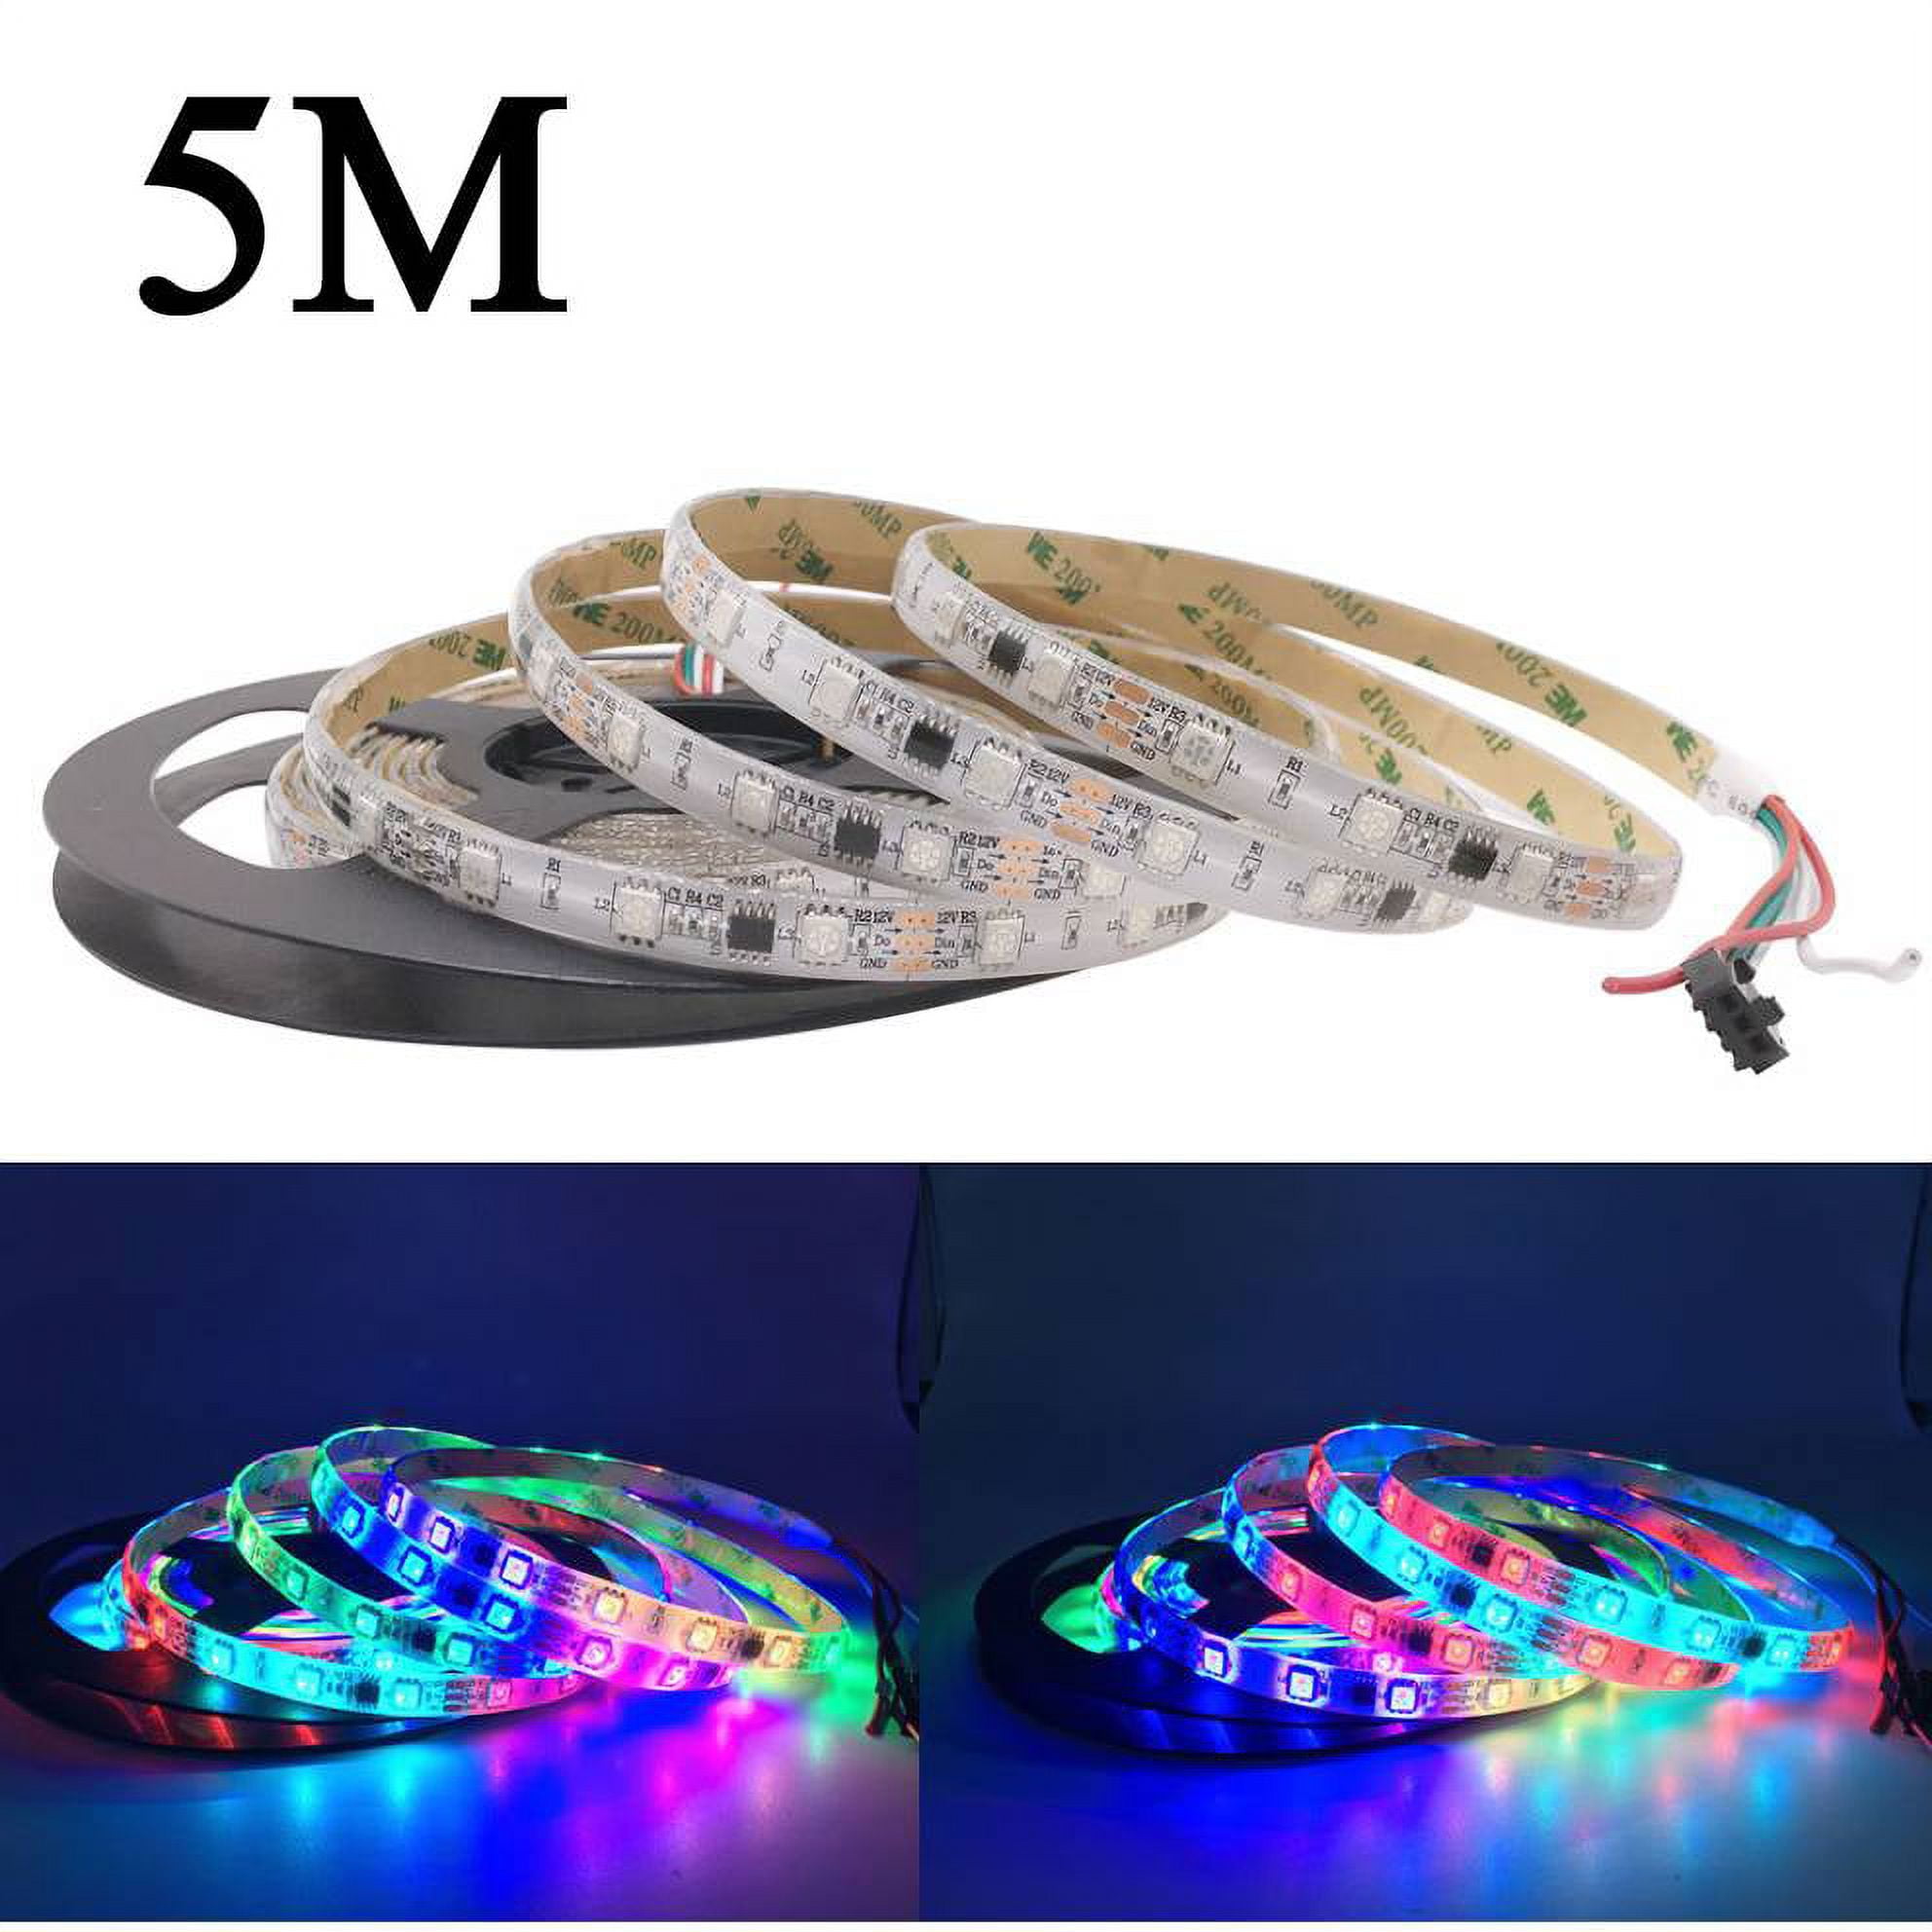 Wyzworks 25ft Flexible LED Strip Lights 2-in-1 Warm & Cool White Dimmable Lighting W Remote Control Timer Color Rang from 3000K-6000K, Size: 25